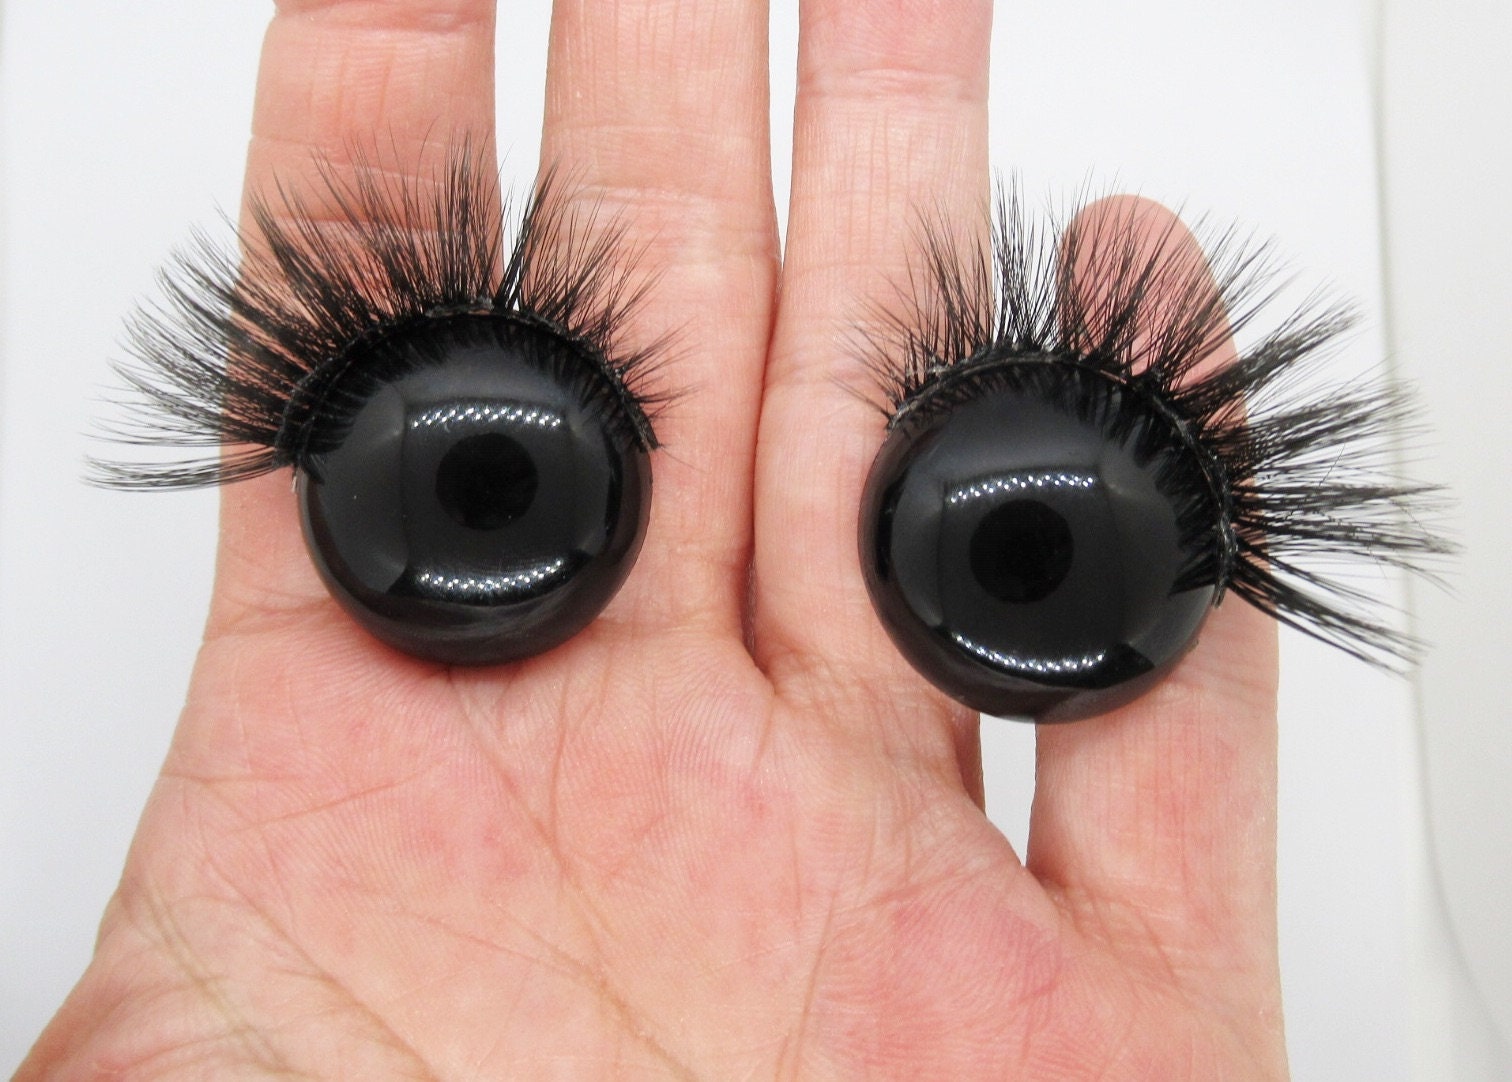 12mm Amigurumi Safety Eyes in Black Plastic for Doll, Toys Amigurumi  Animals Eyes, Round Safety Eyes, Plastic Doll Eyes 5/10/25 Pairs 